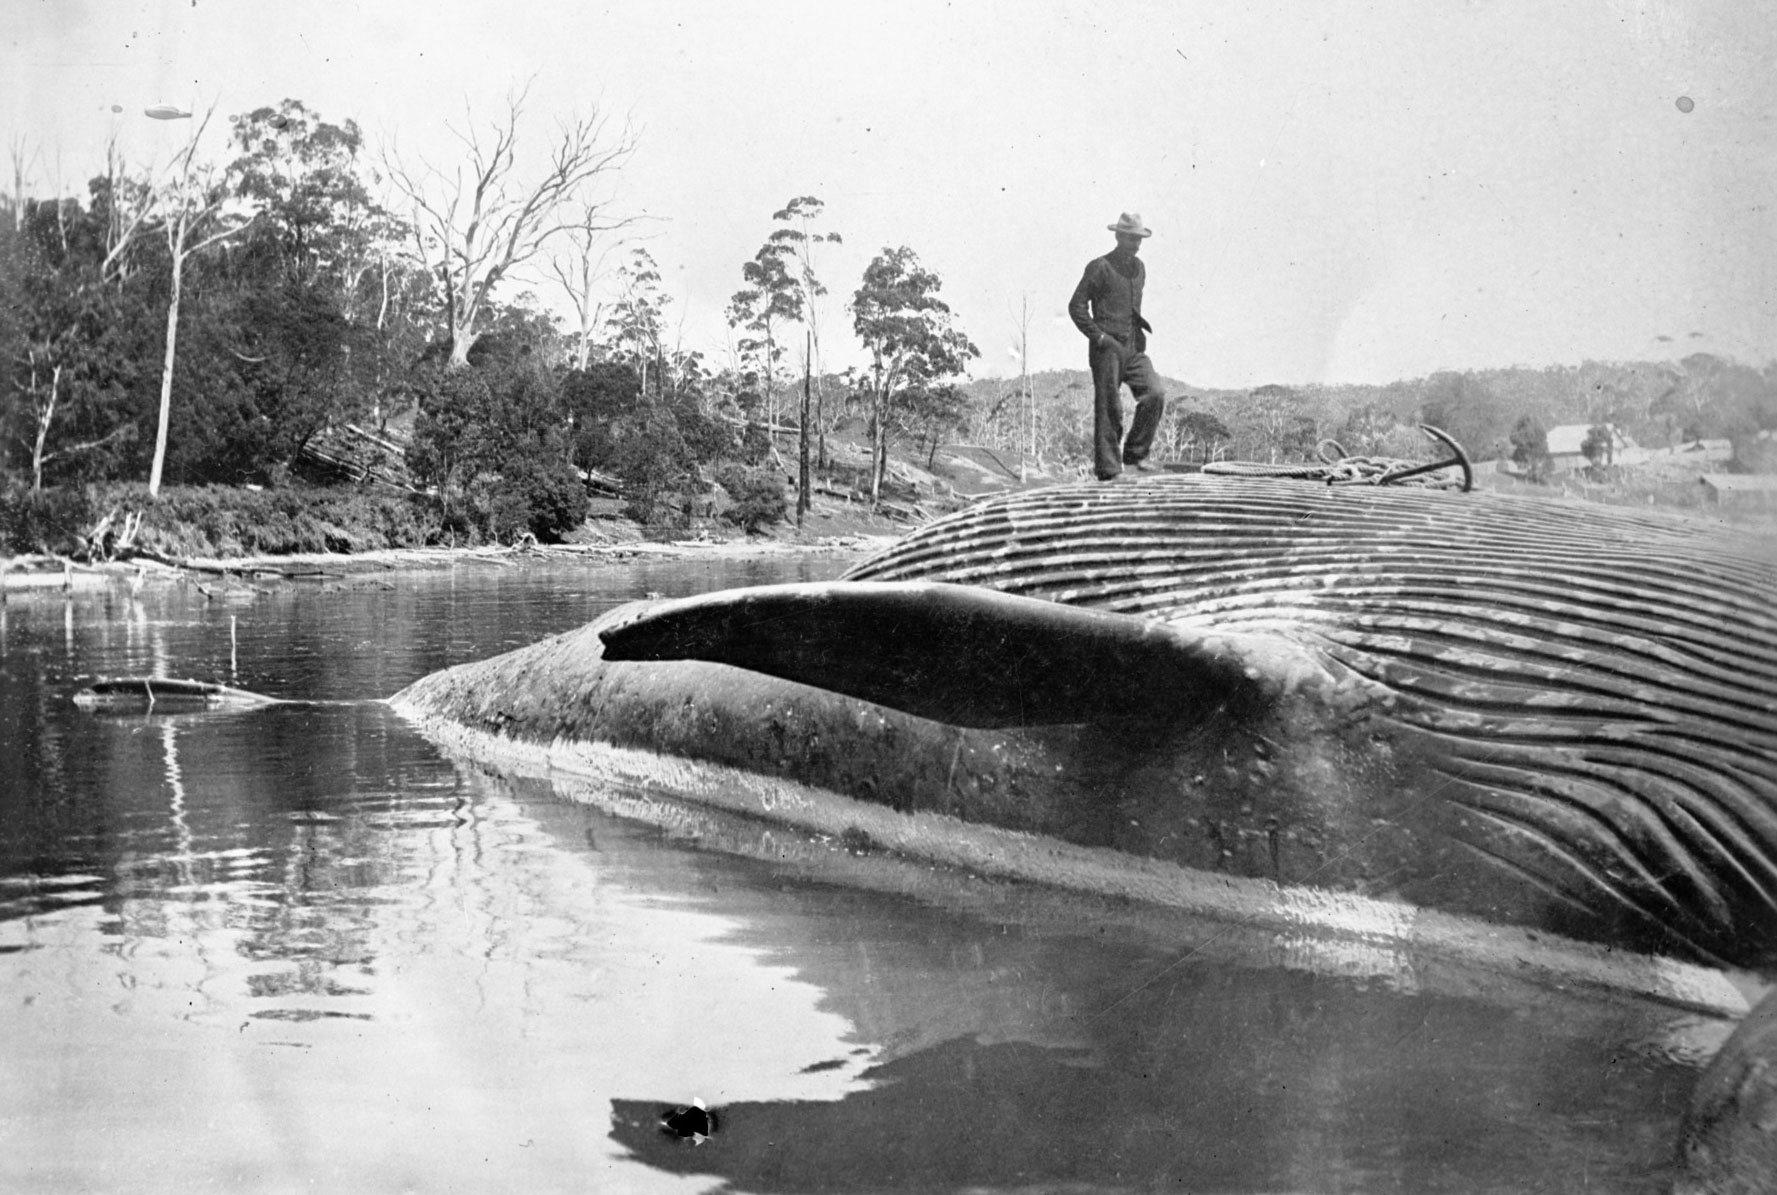 A man on a dead whale, Twofold Bay, New South Wales.